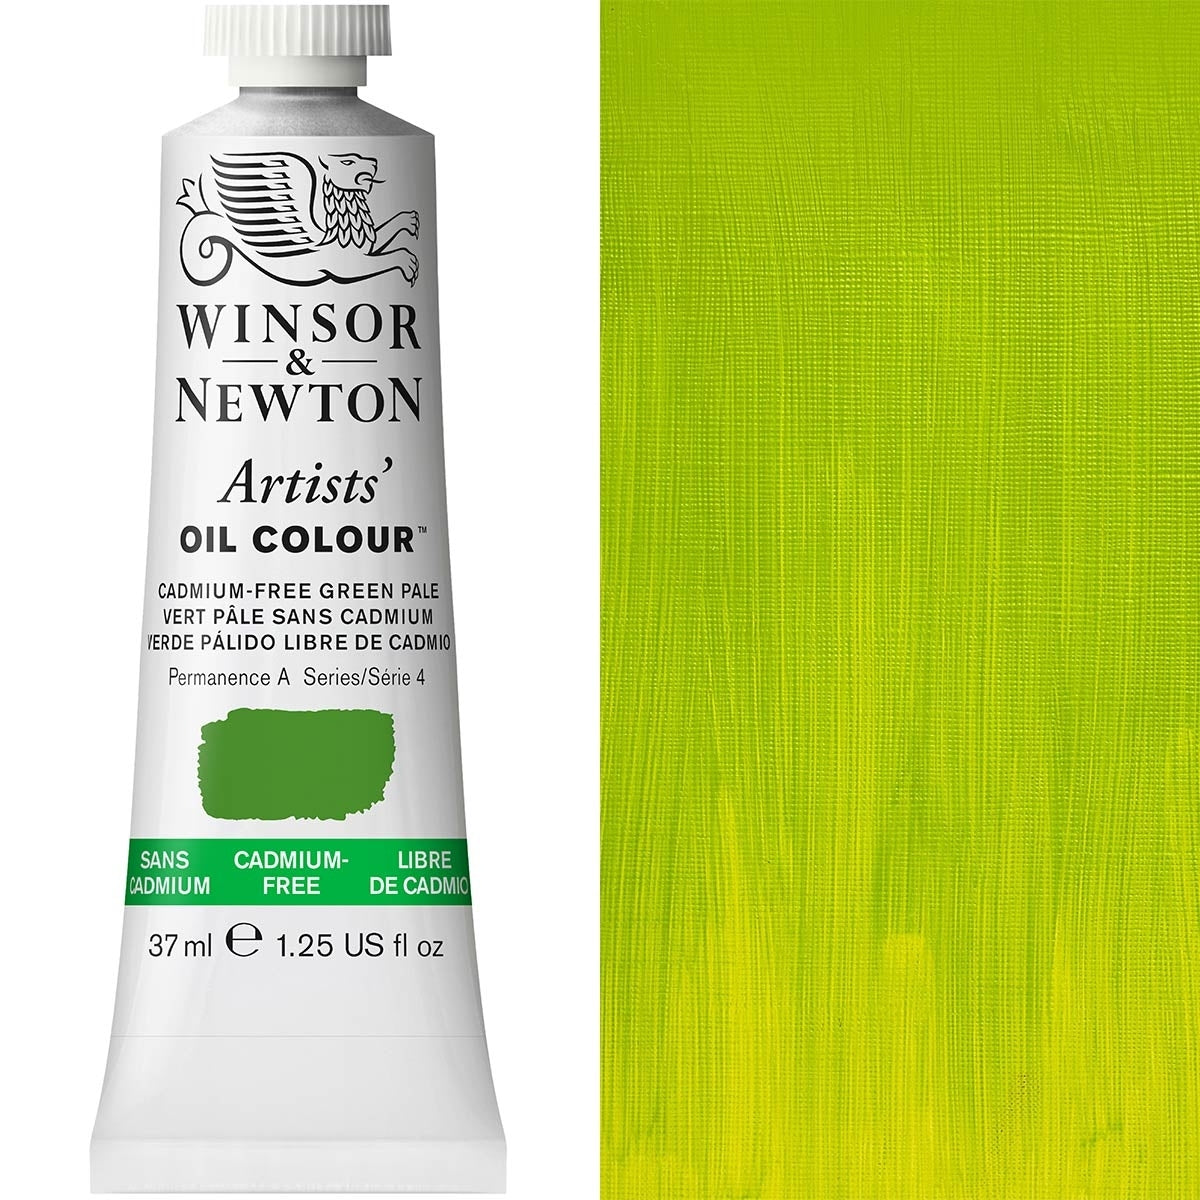 Winsor and Newton - Artists' Oil Colour - 37ml - Cad Free Green Pale